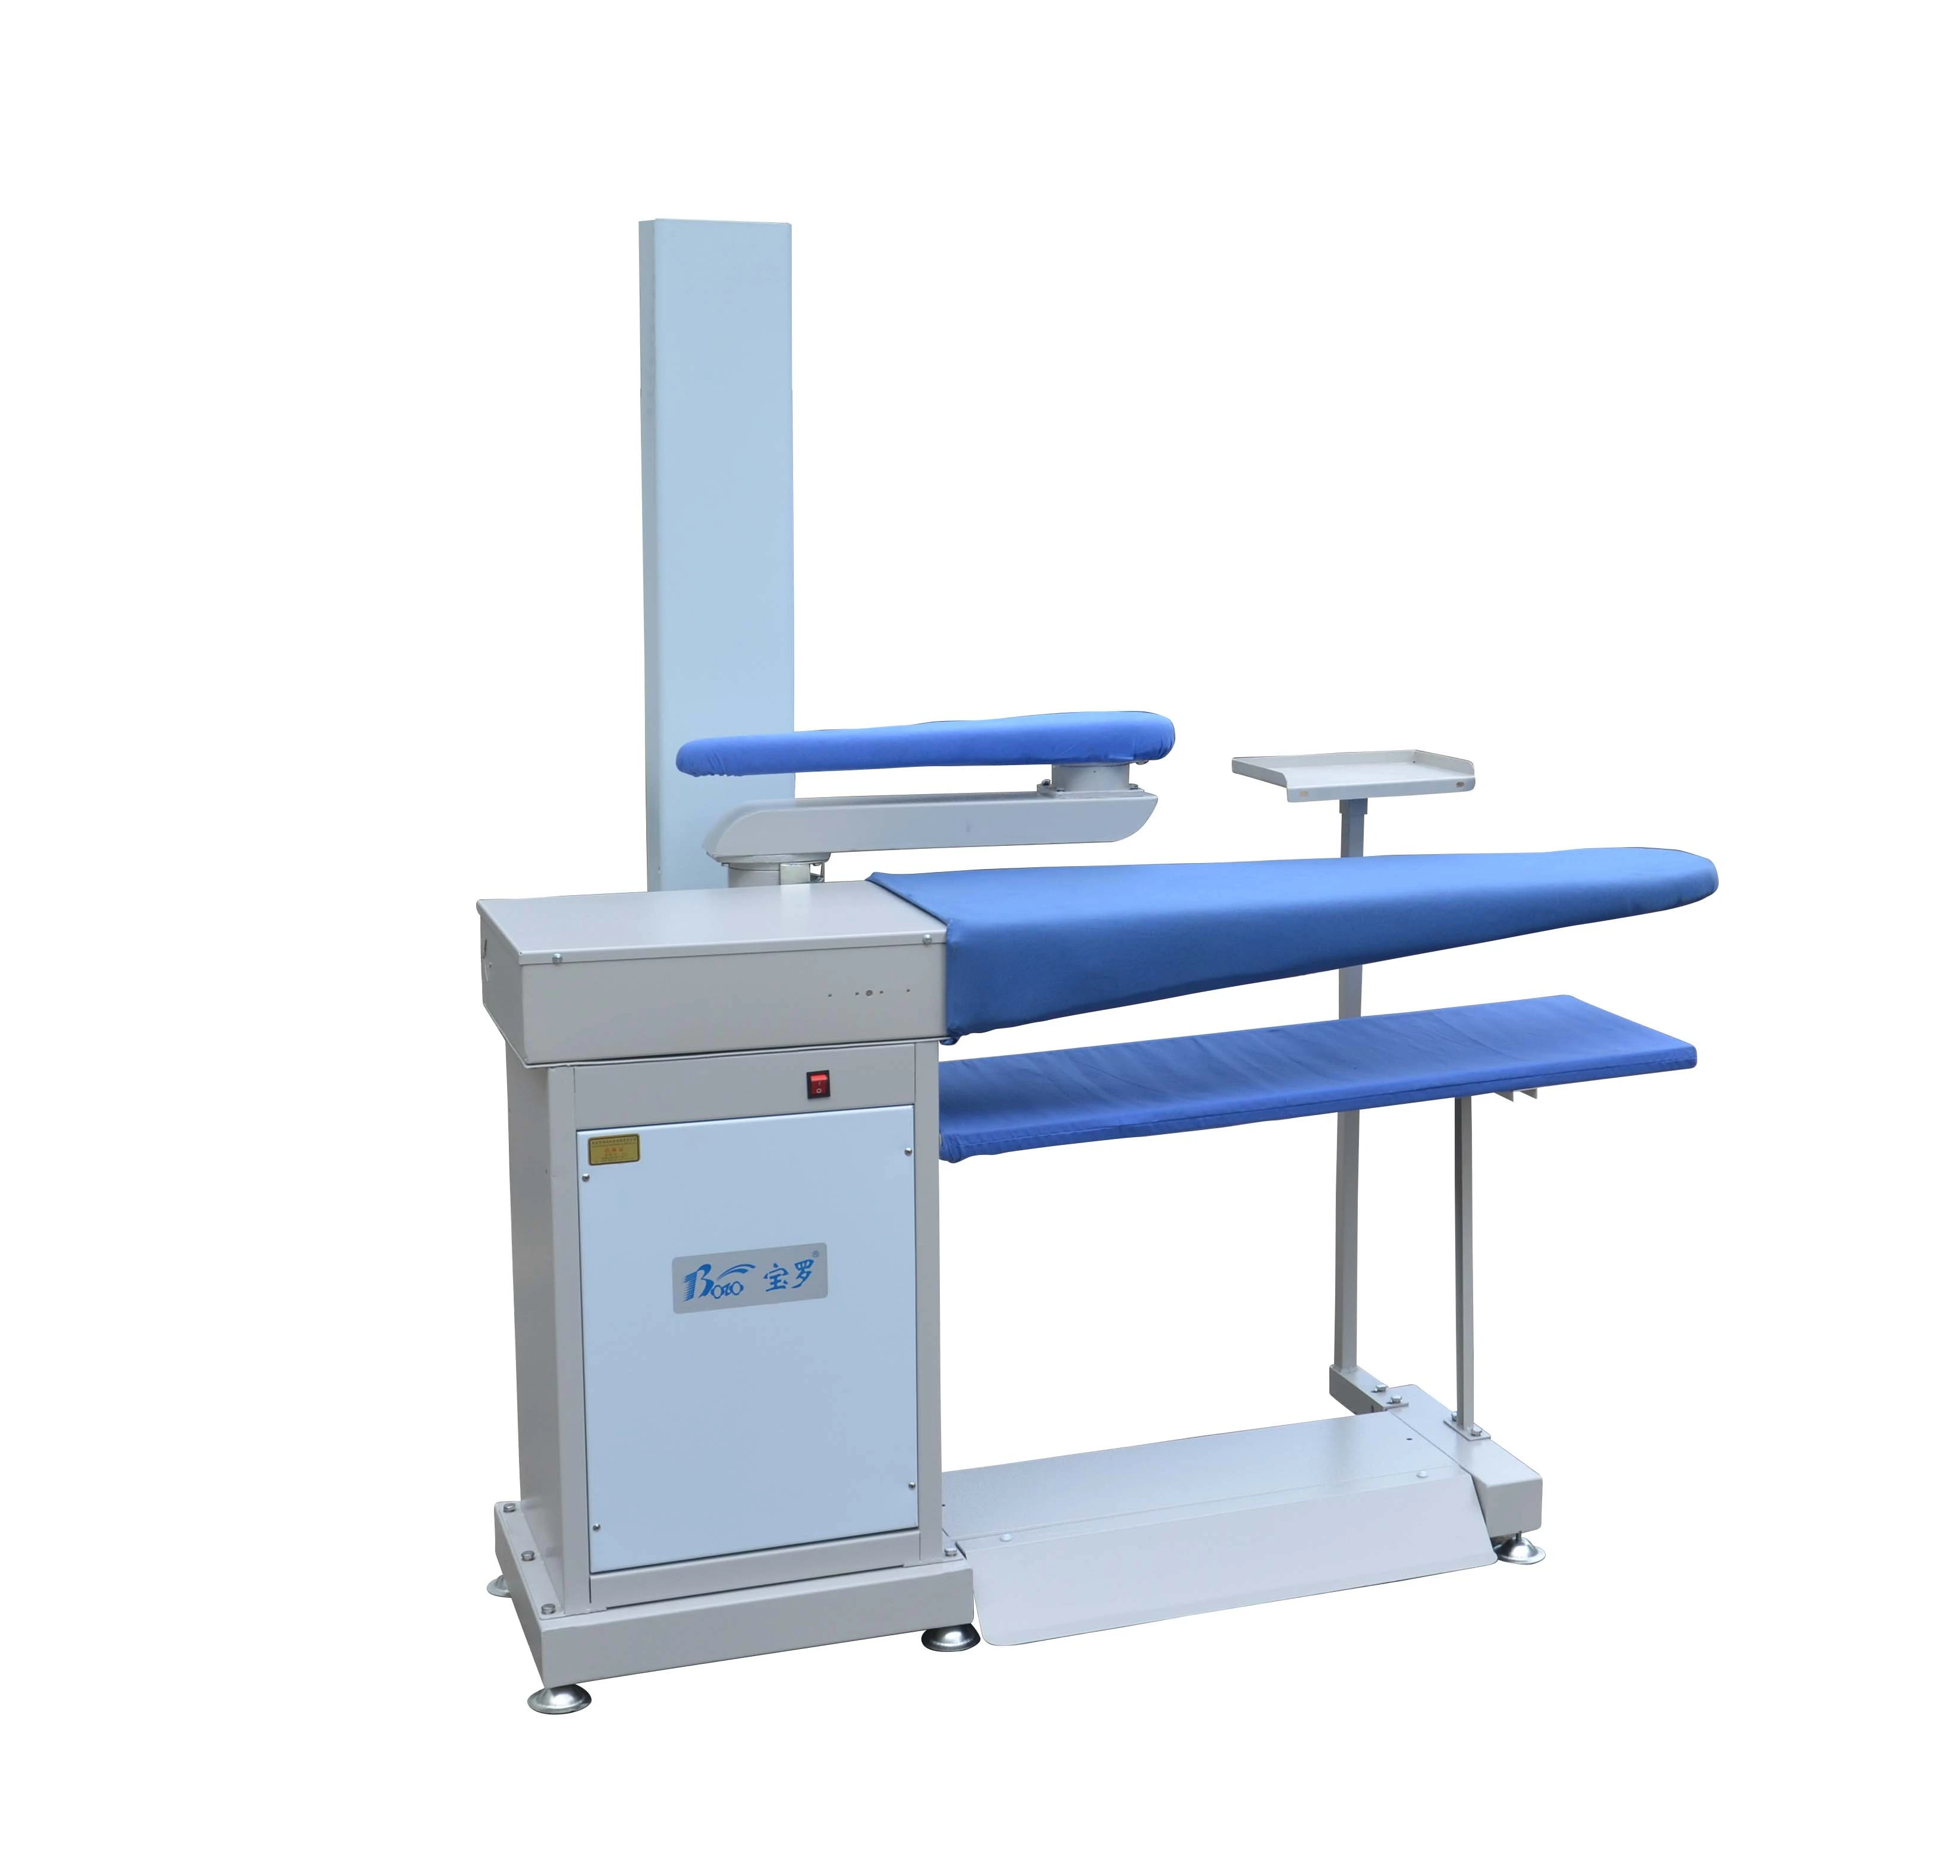 BL-1100RSP RIGHT SIDE BRIDGE TYPE UPWARD EXHAUST PIPE VACUUM IRONING TABLE WITH 1 BUCK AND IRON HANGER